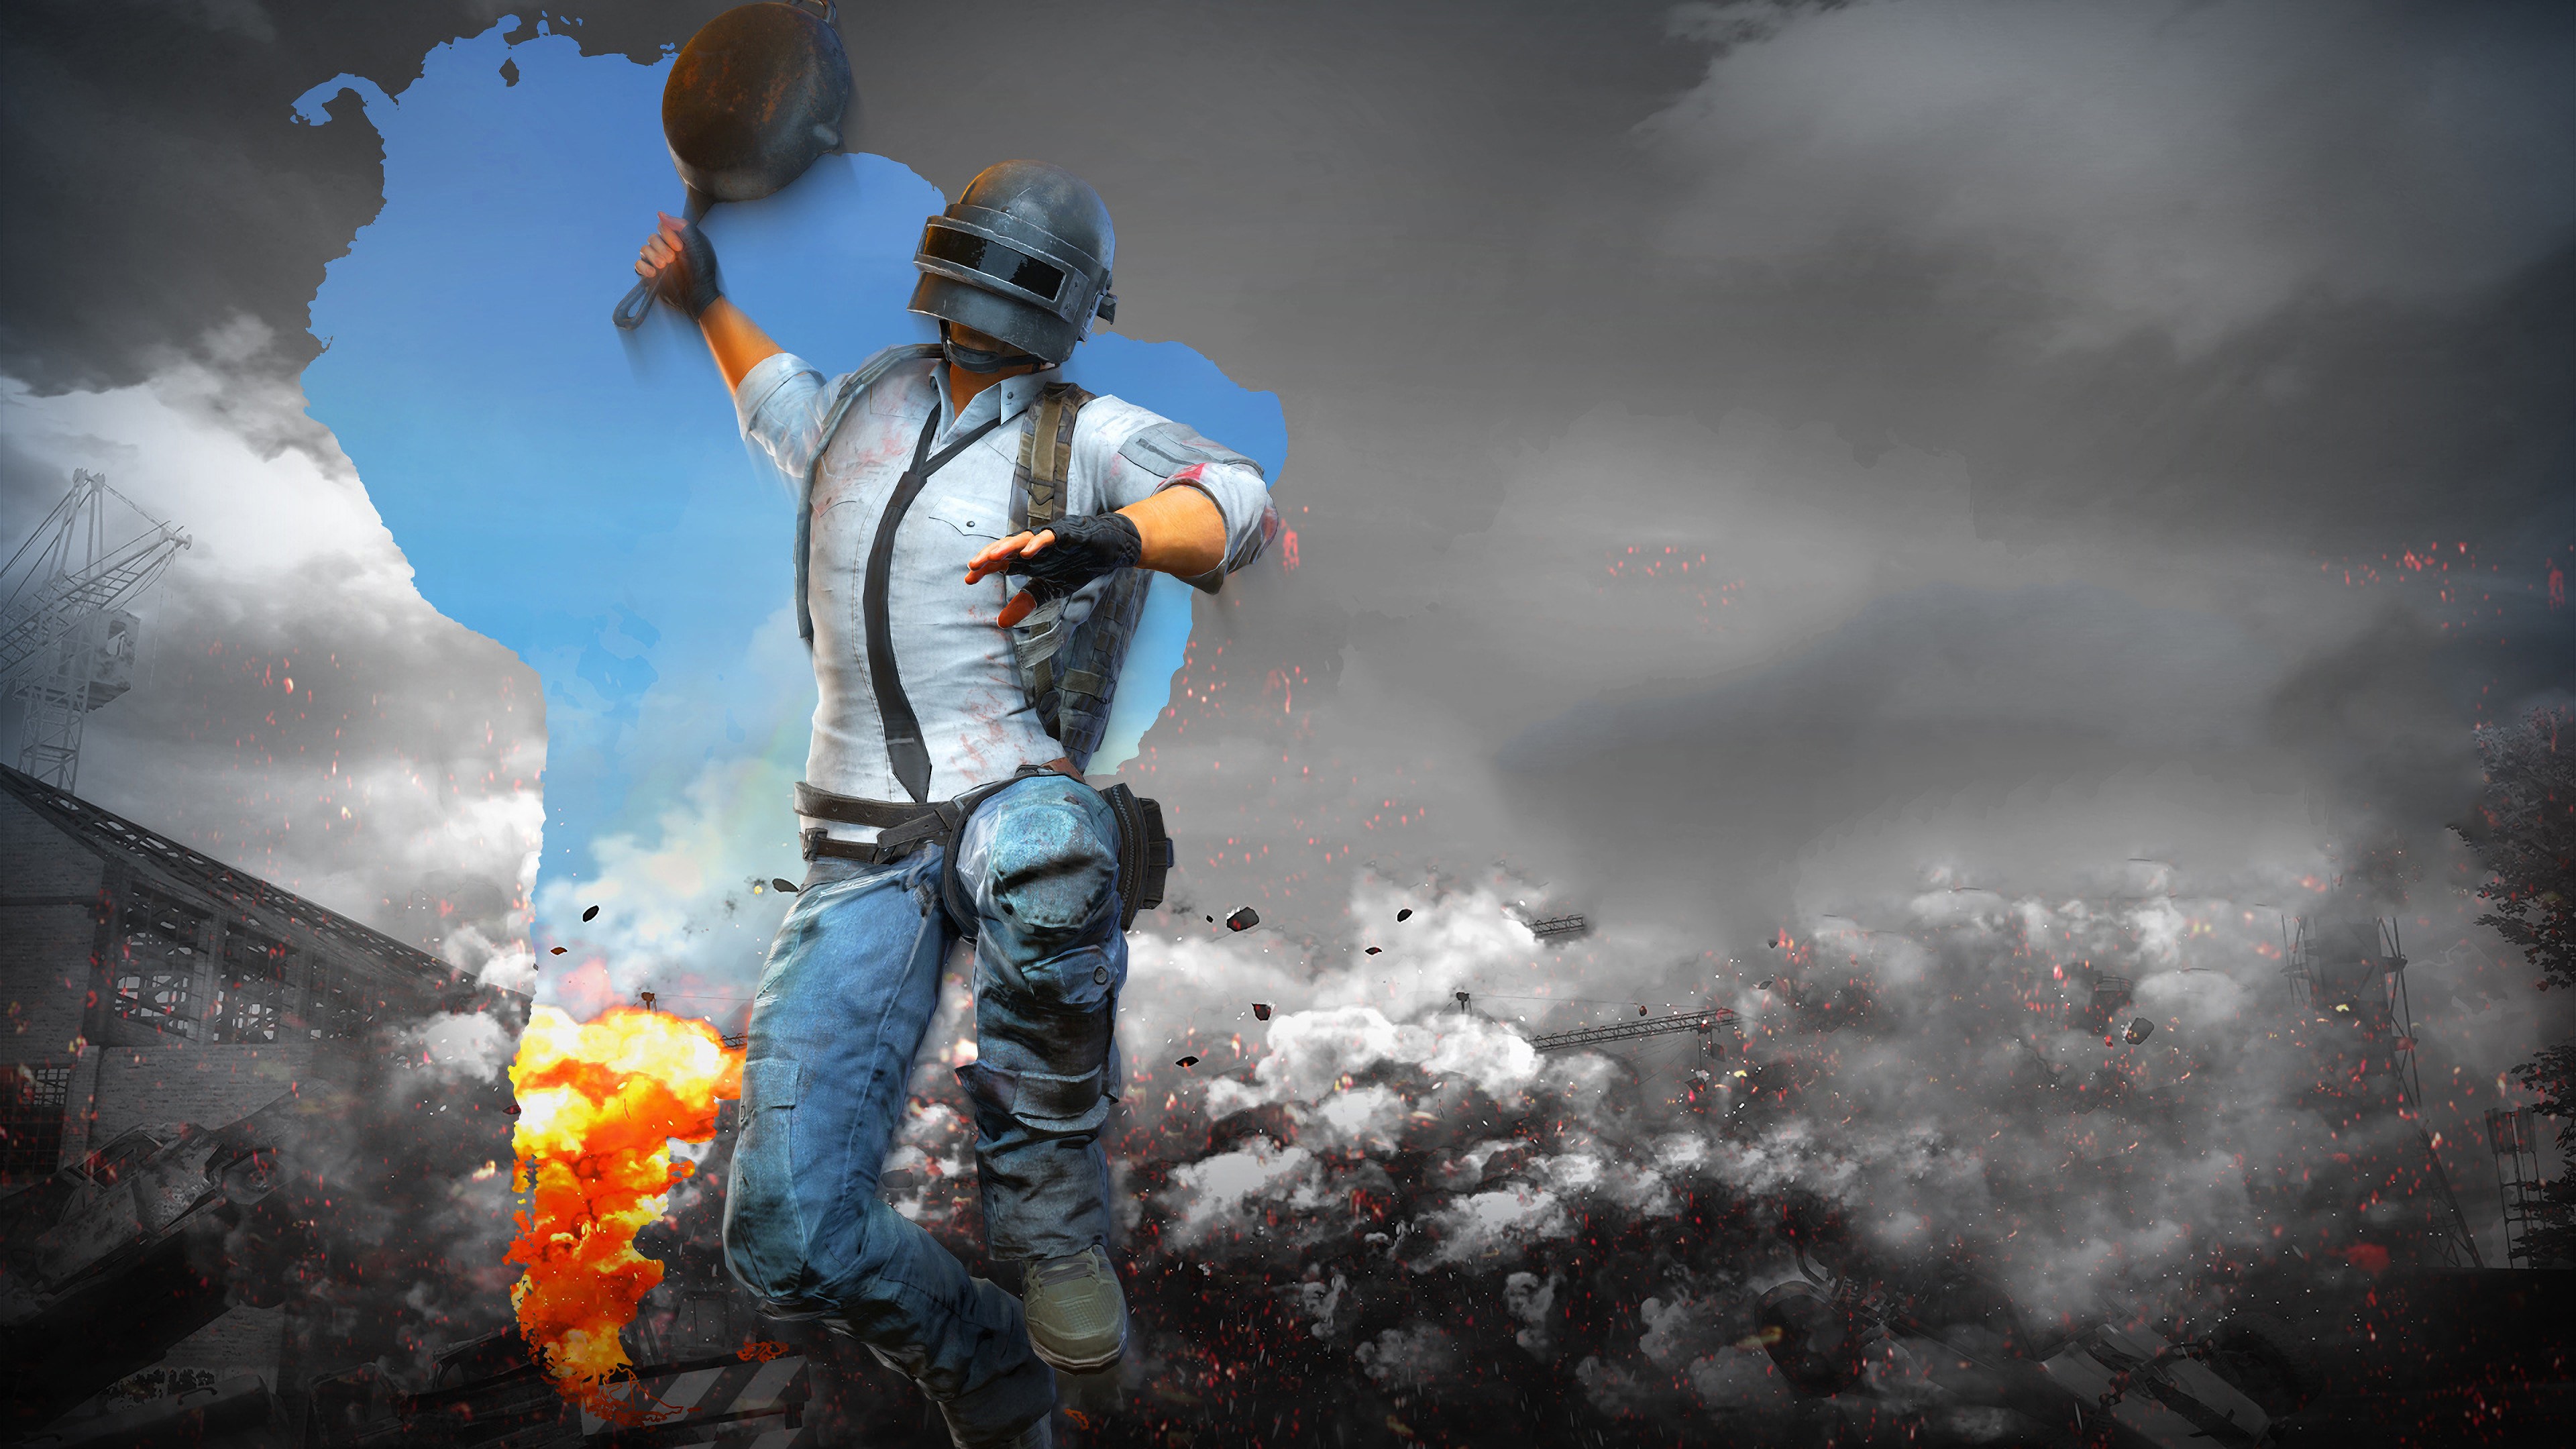 Pubg Wallpaper In Full HD For Pc And Phone Atechguides